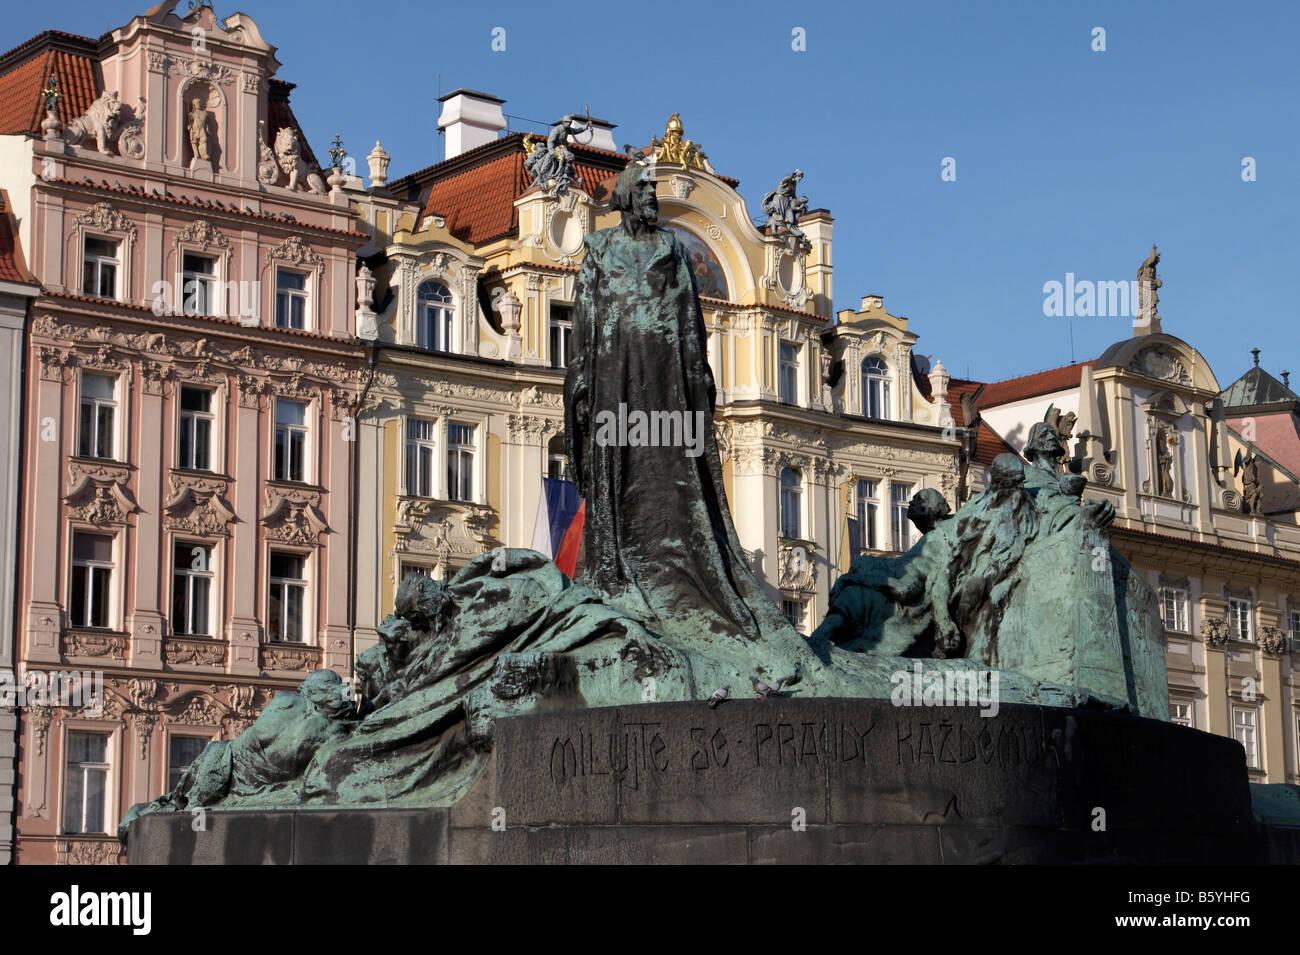 Statue of Jan Hus in the Old Town Square, Prague Stock Photo